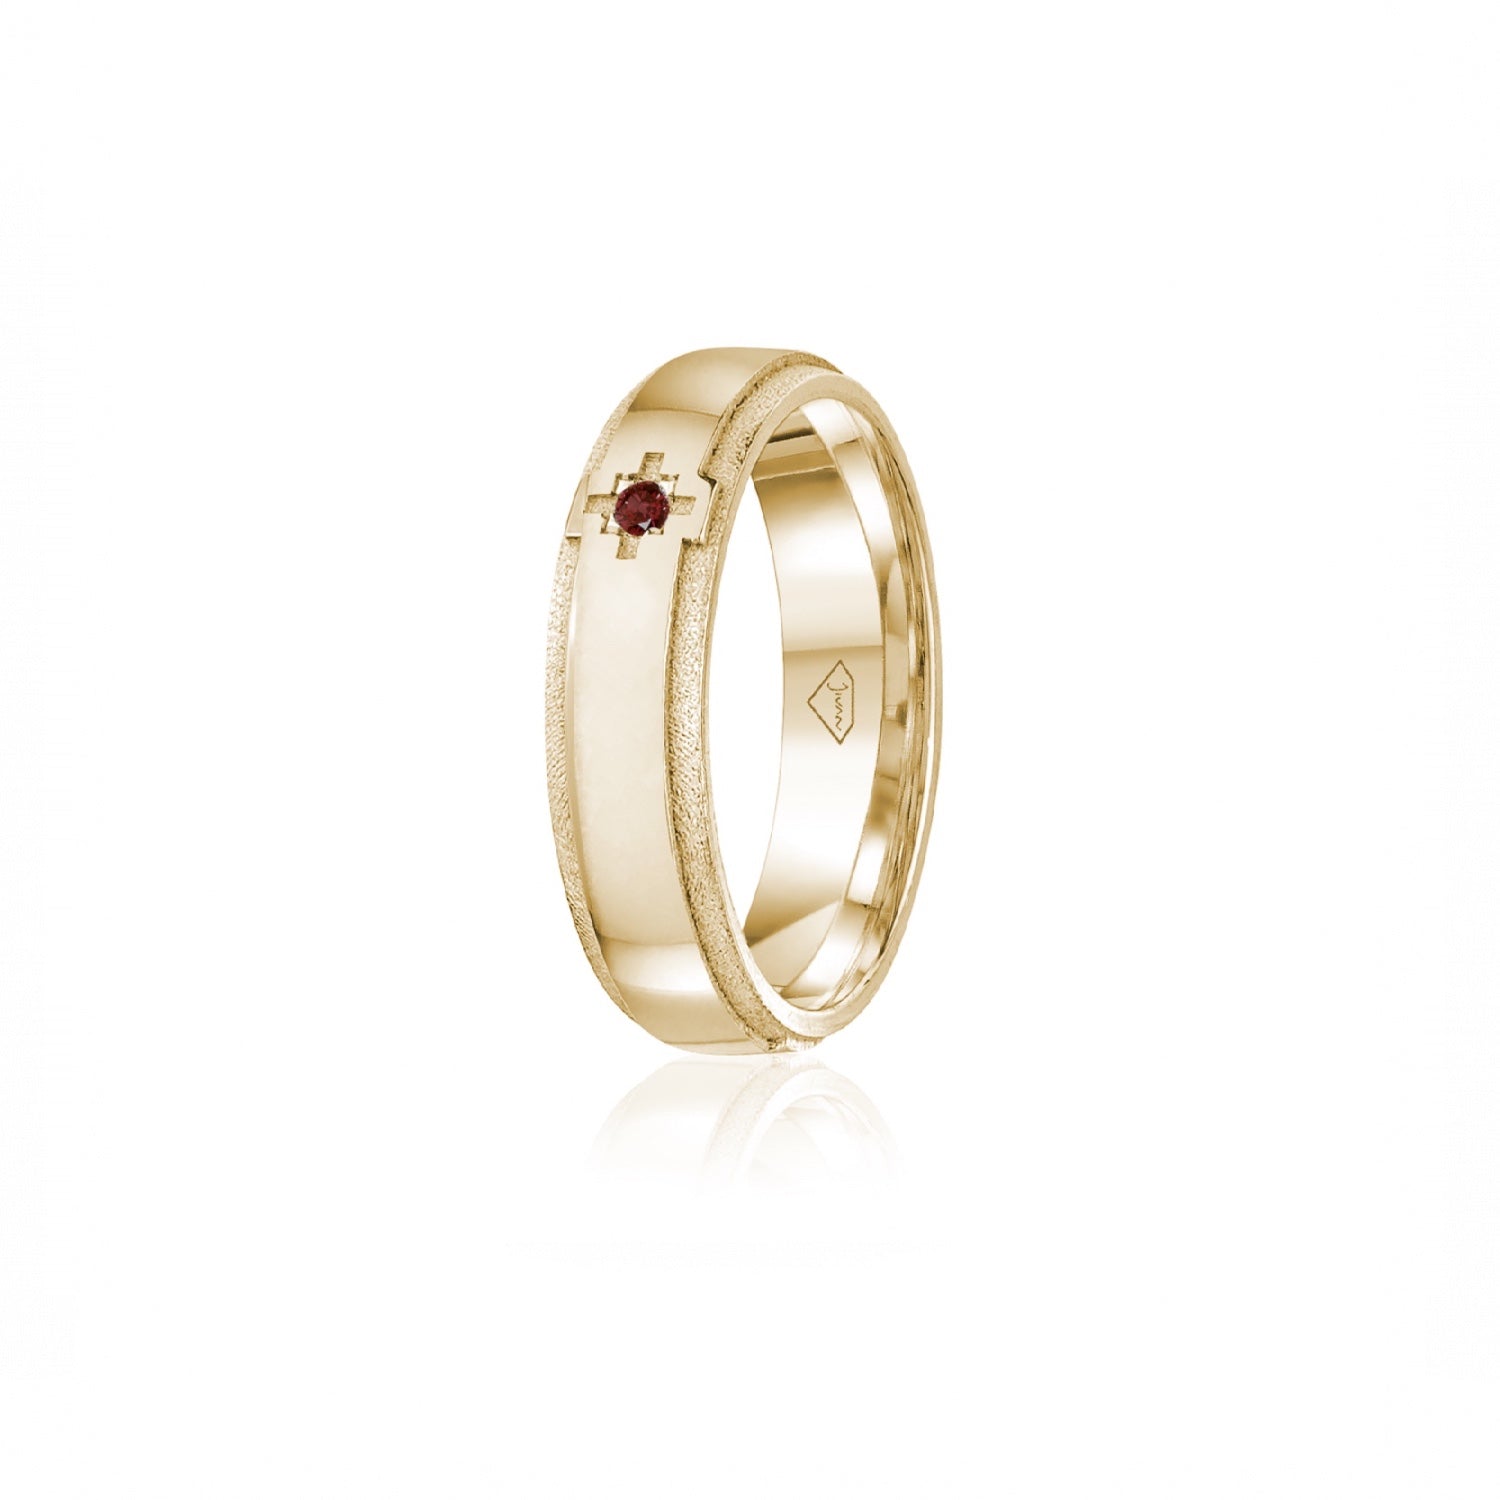 Ruby Accent Polished Finish Bevelled Edge 6-7 mm Wedding Ring in Yellow Gold